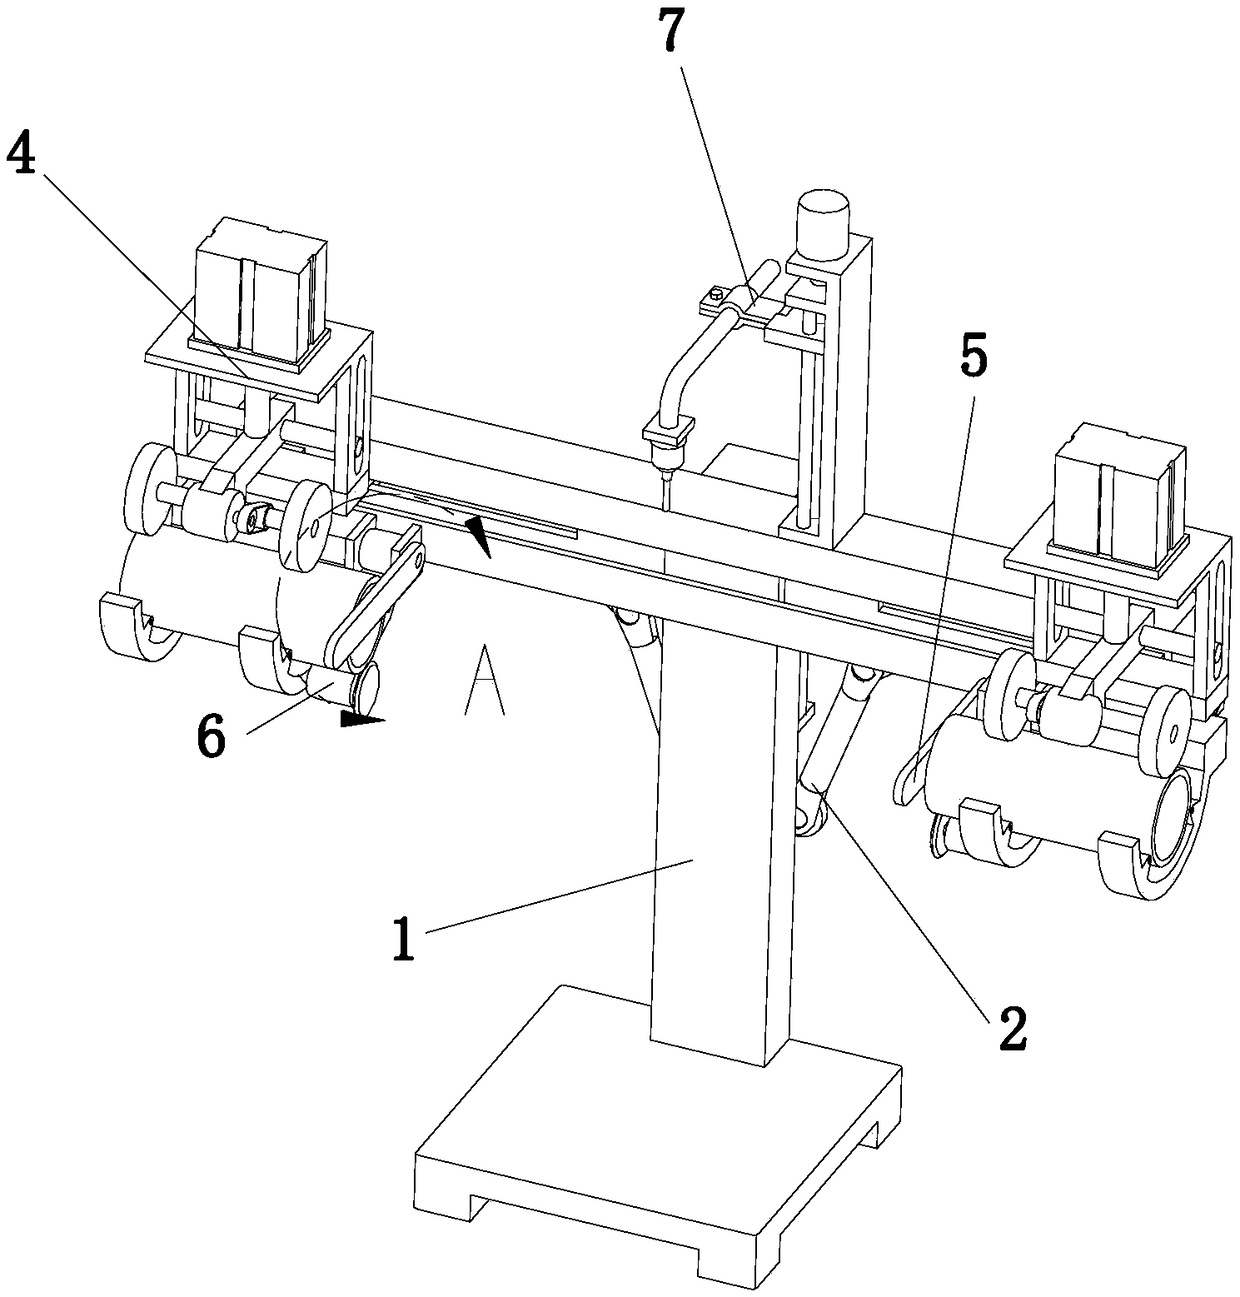 Pipe welding device for building construction